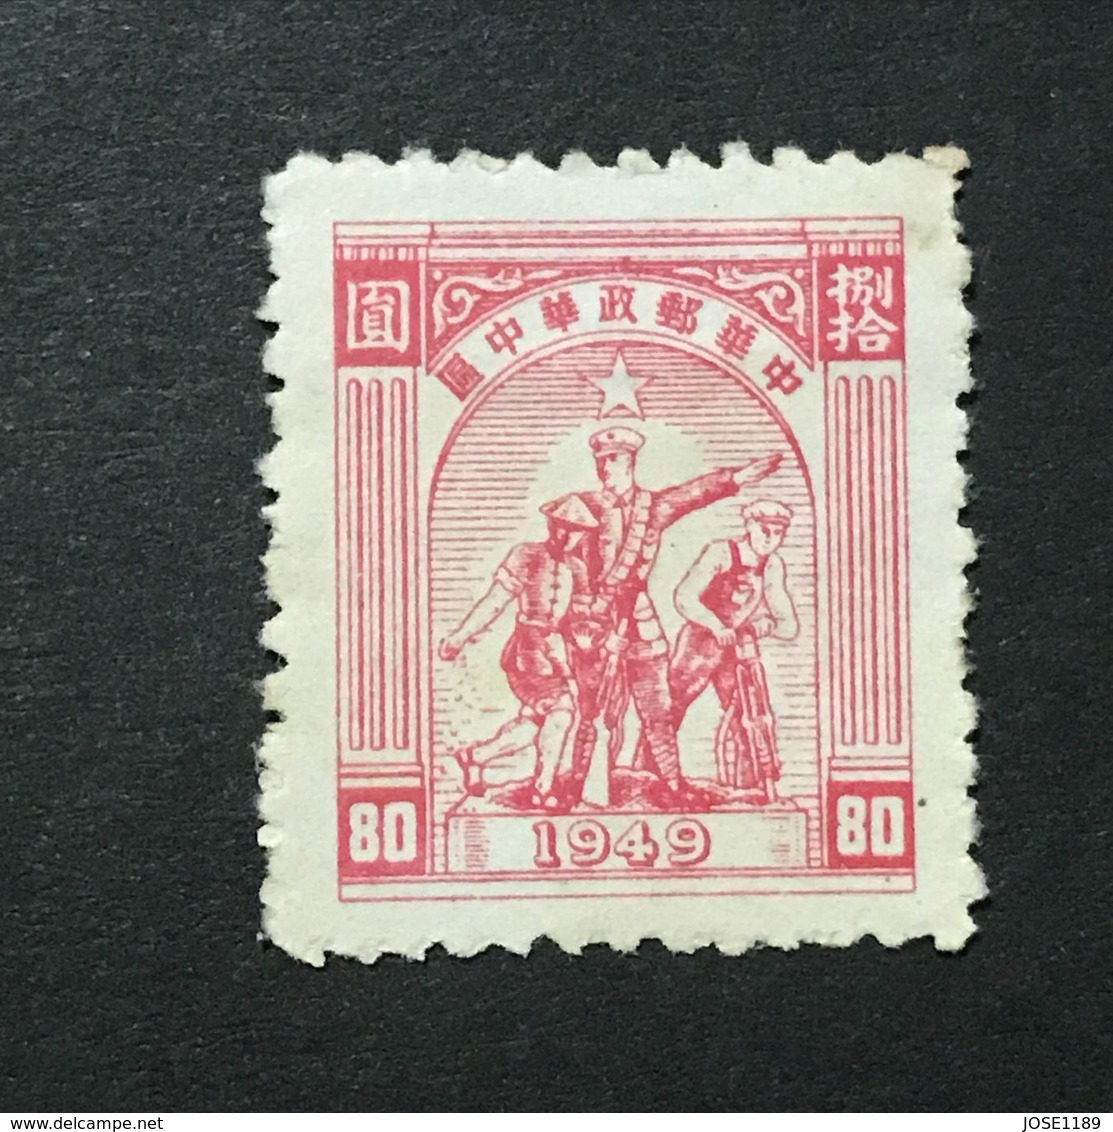 ◆◆◆CHINA 1949  1st Print Worker-Peasant-Soldier Design Issue   $80  NEW   AA3288 - China Central 1948-49